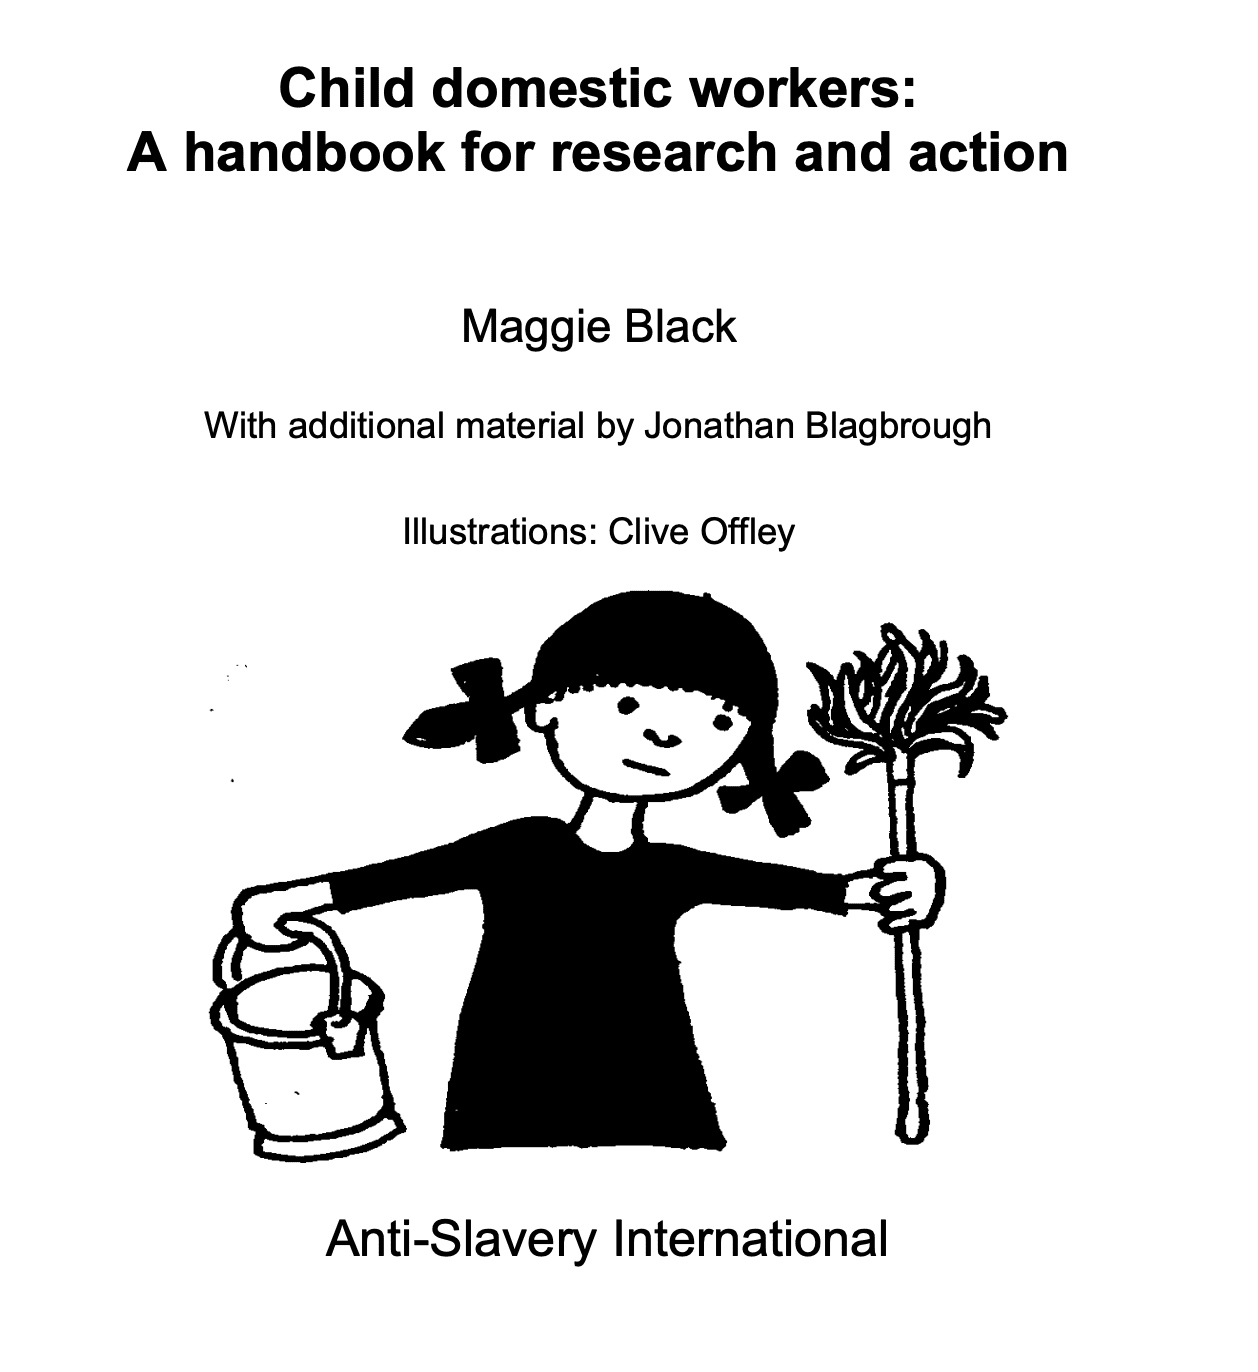 Child domestic workers:  A handbook for research and action